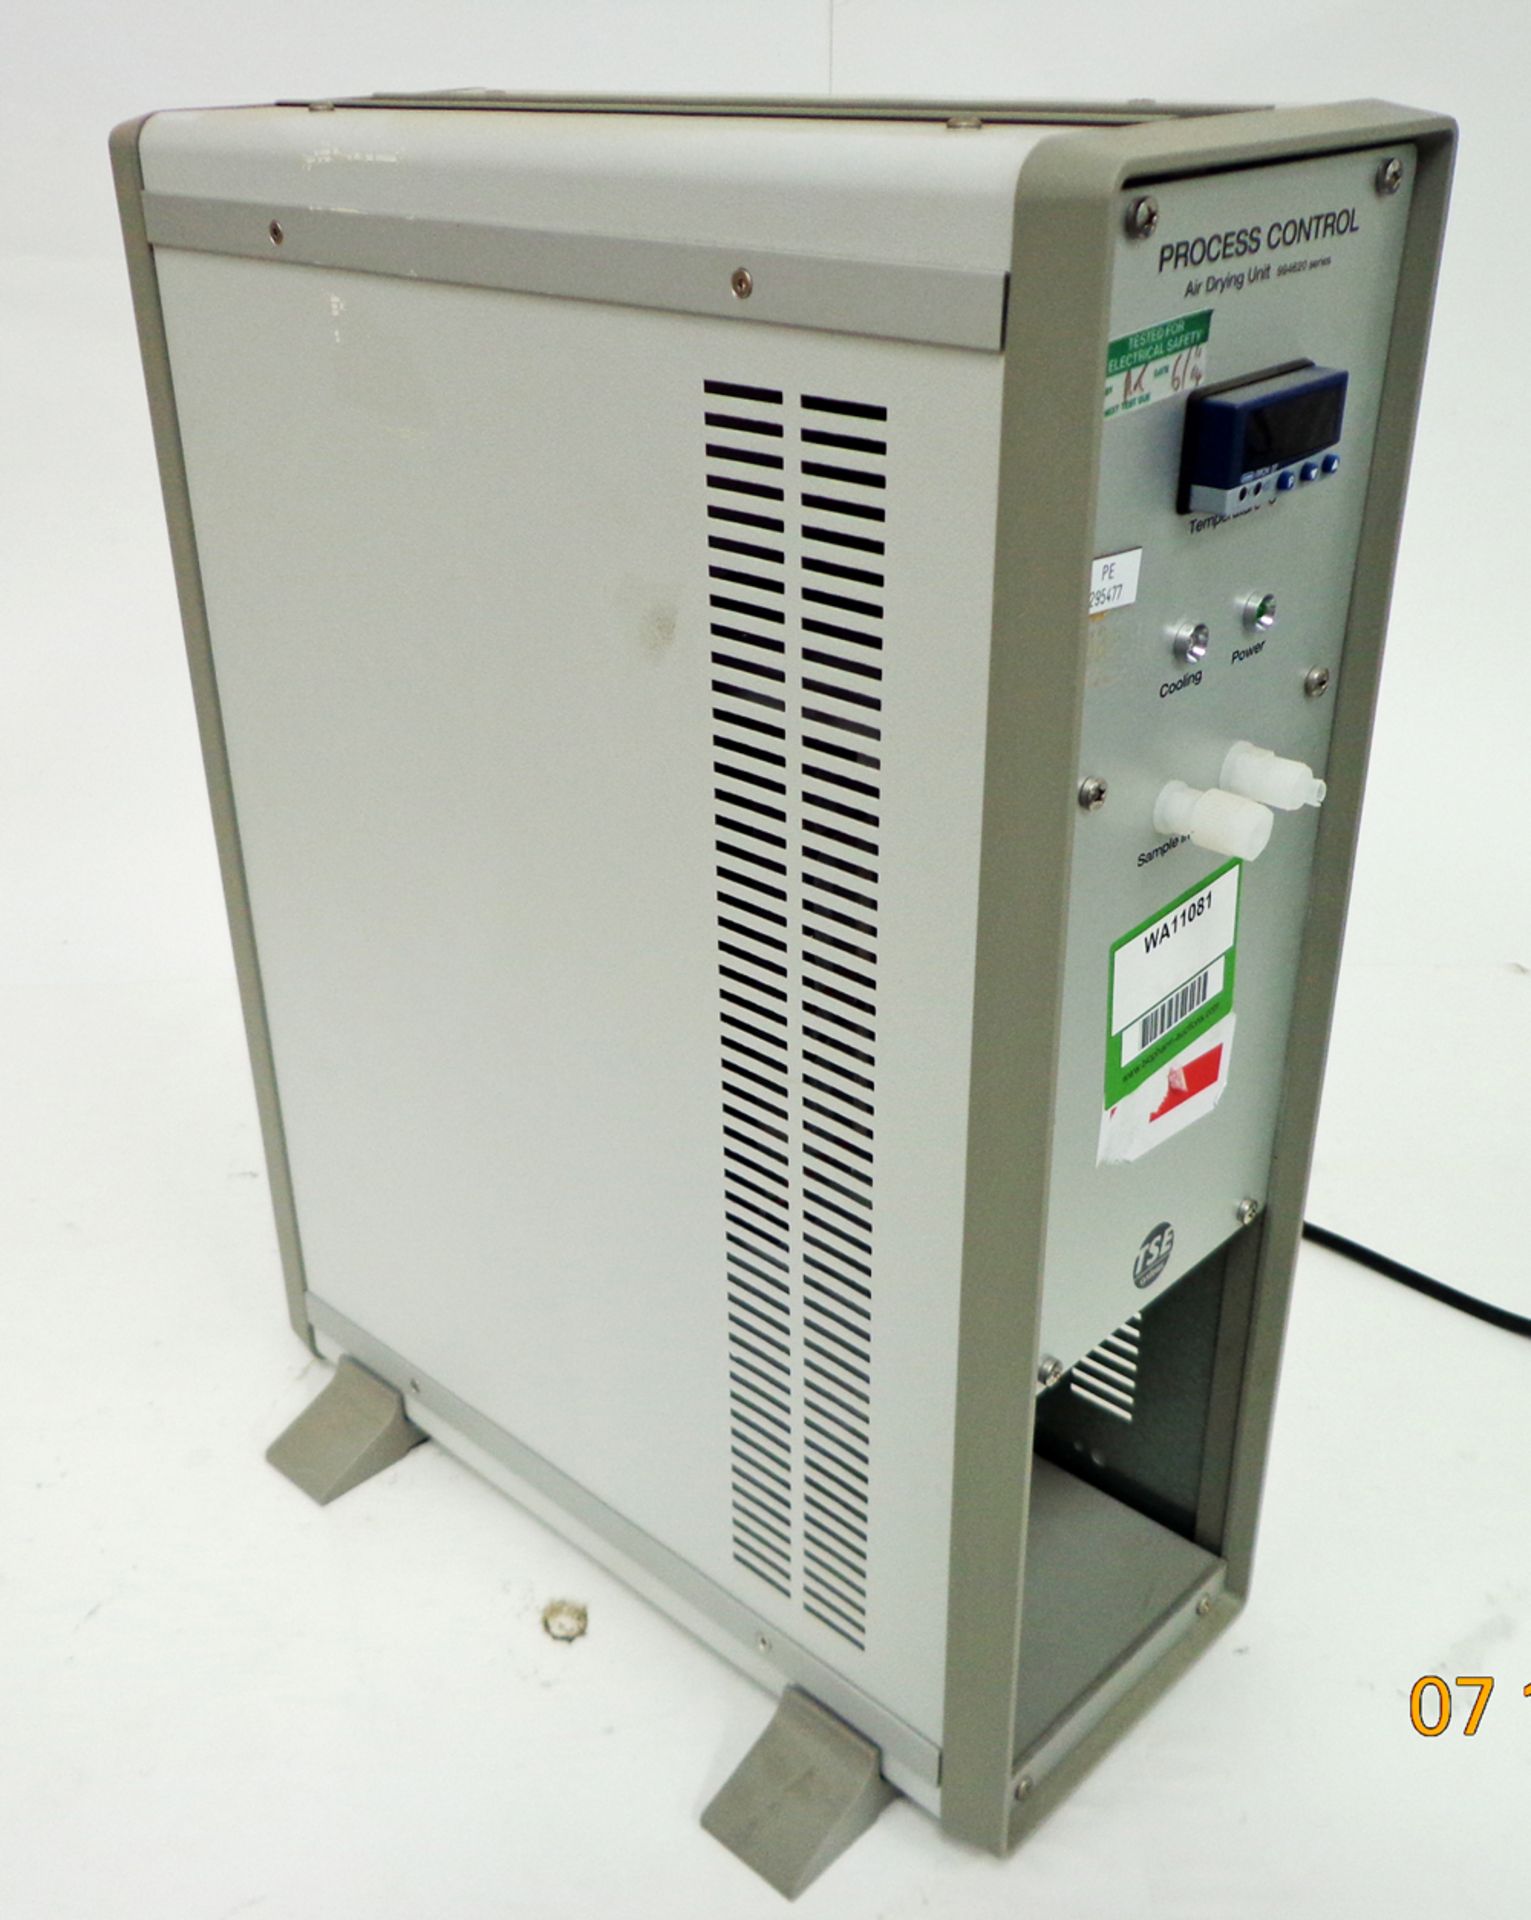 TSE Systems Process Control Air Drying Unit, 994620. - Image 5 of 6